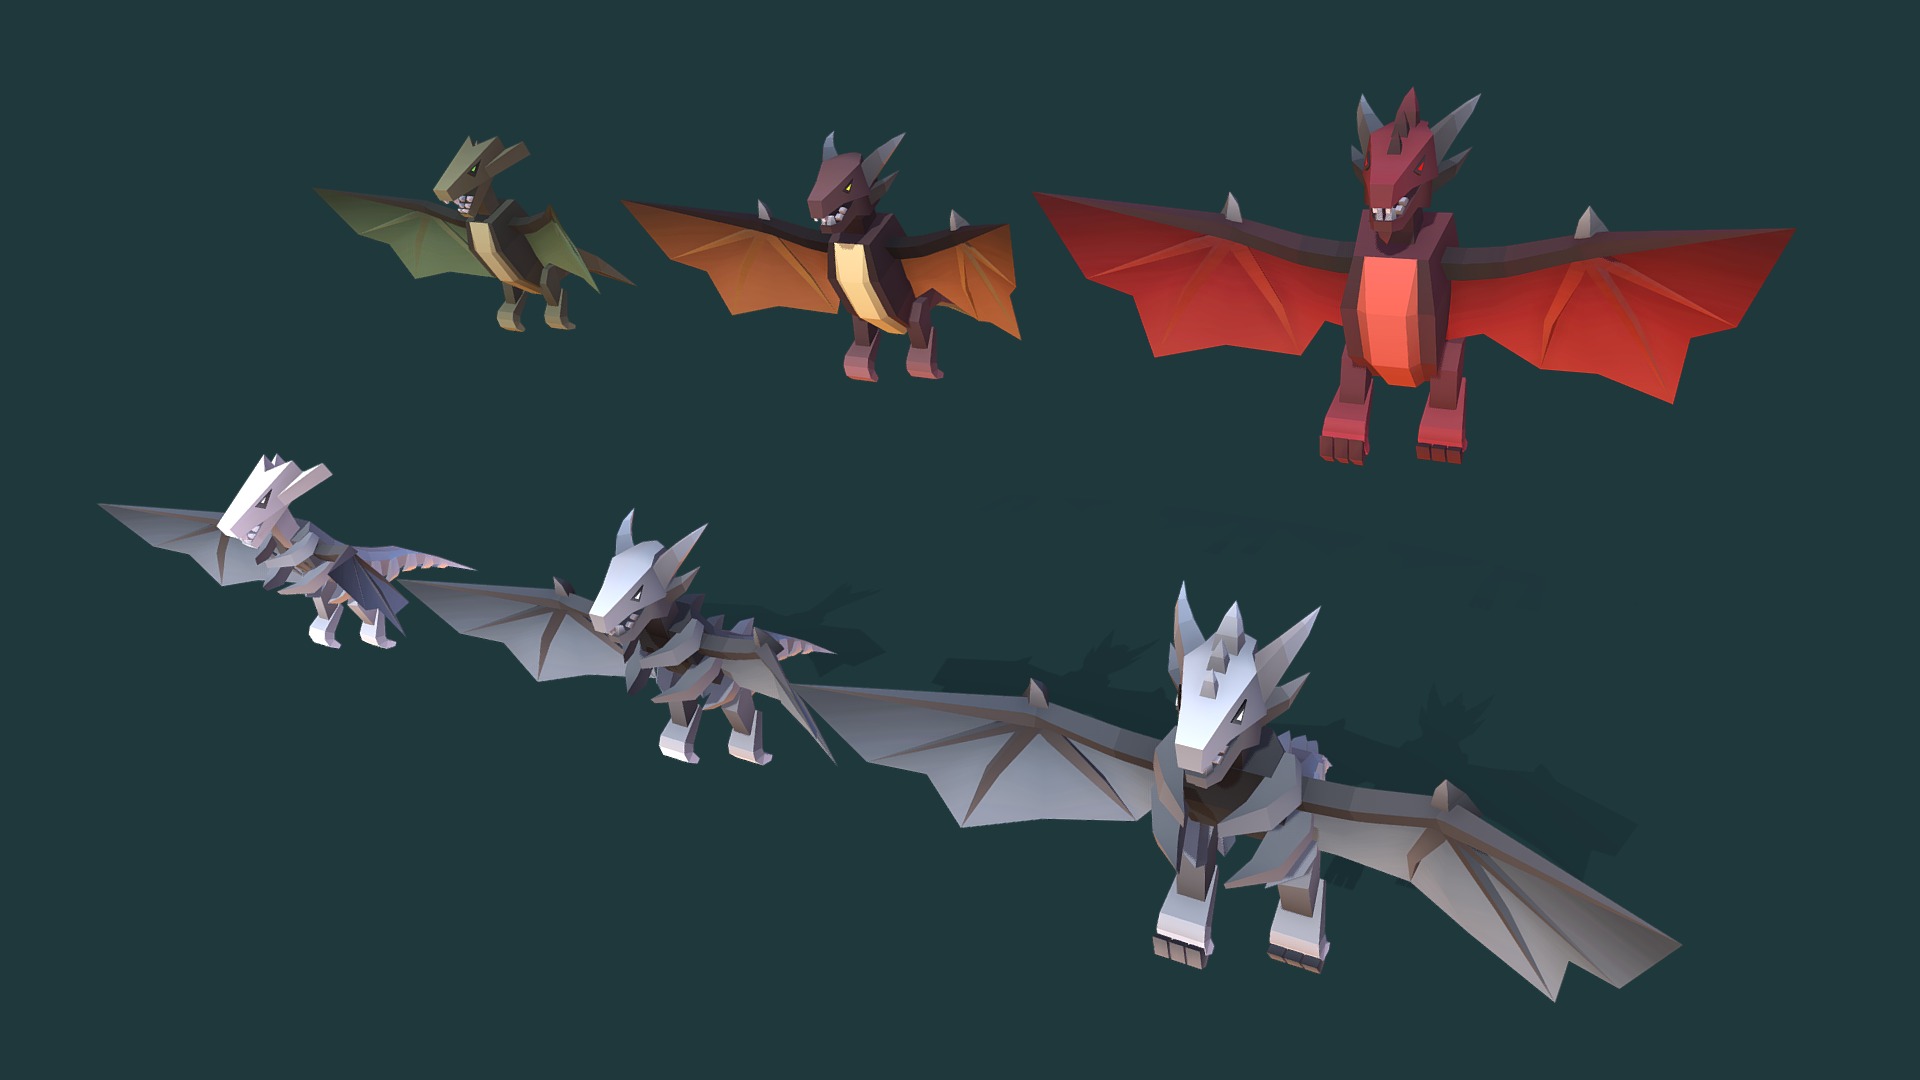 3D model Dragon Animations - This is a 3D model of the Dragon Animations. The 3D model is about a group of colorful paper airplanes.